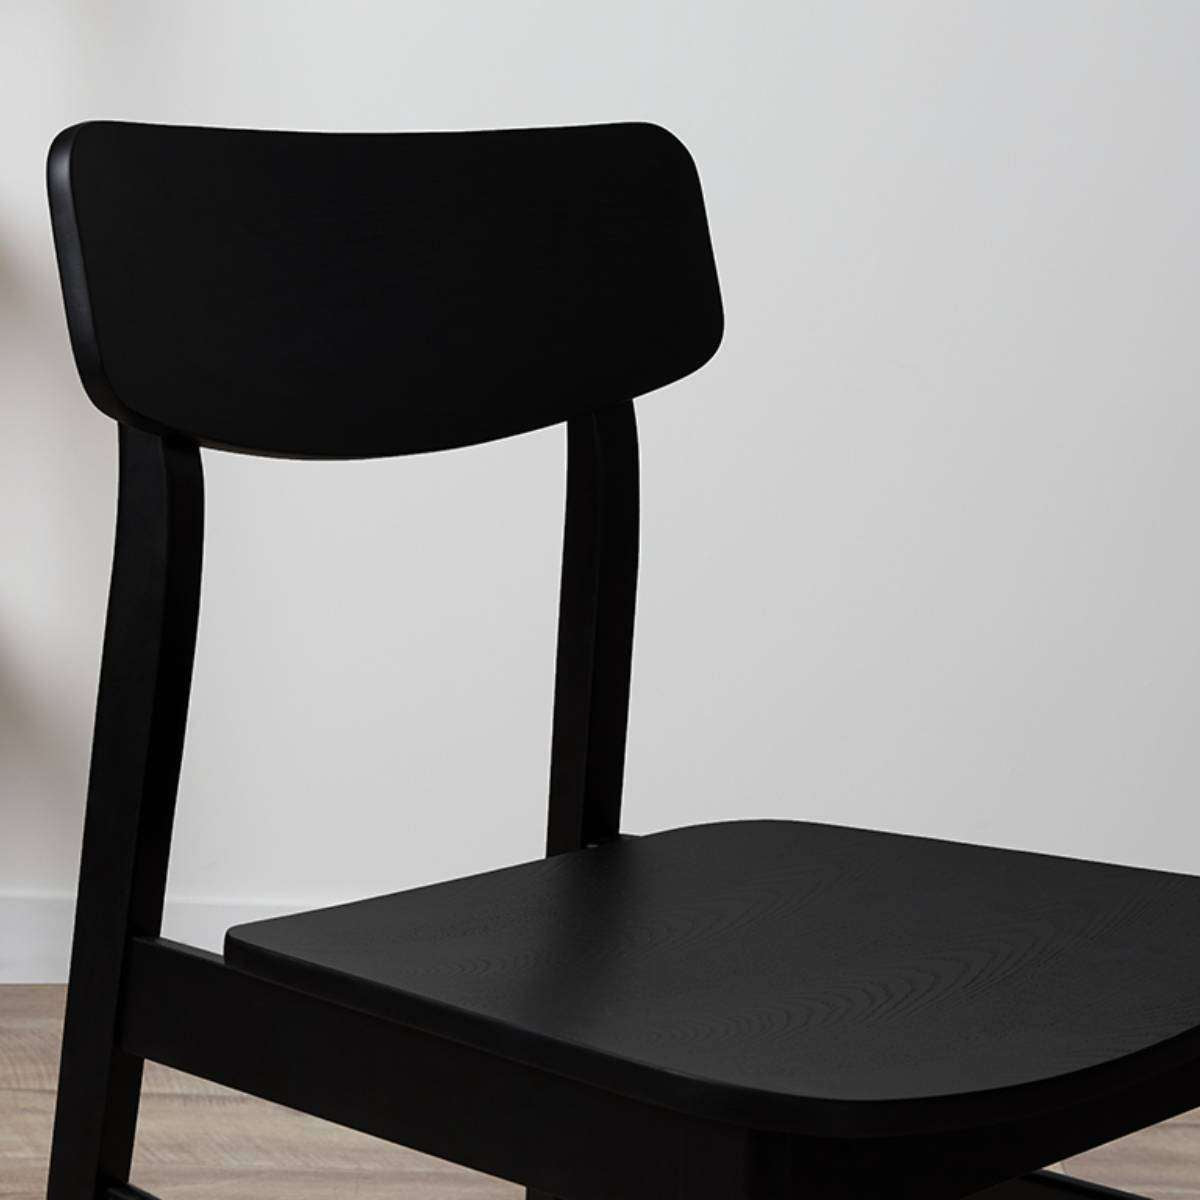 Leon Dining Chair - Set of Two - Black